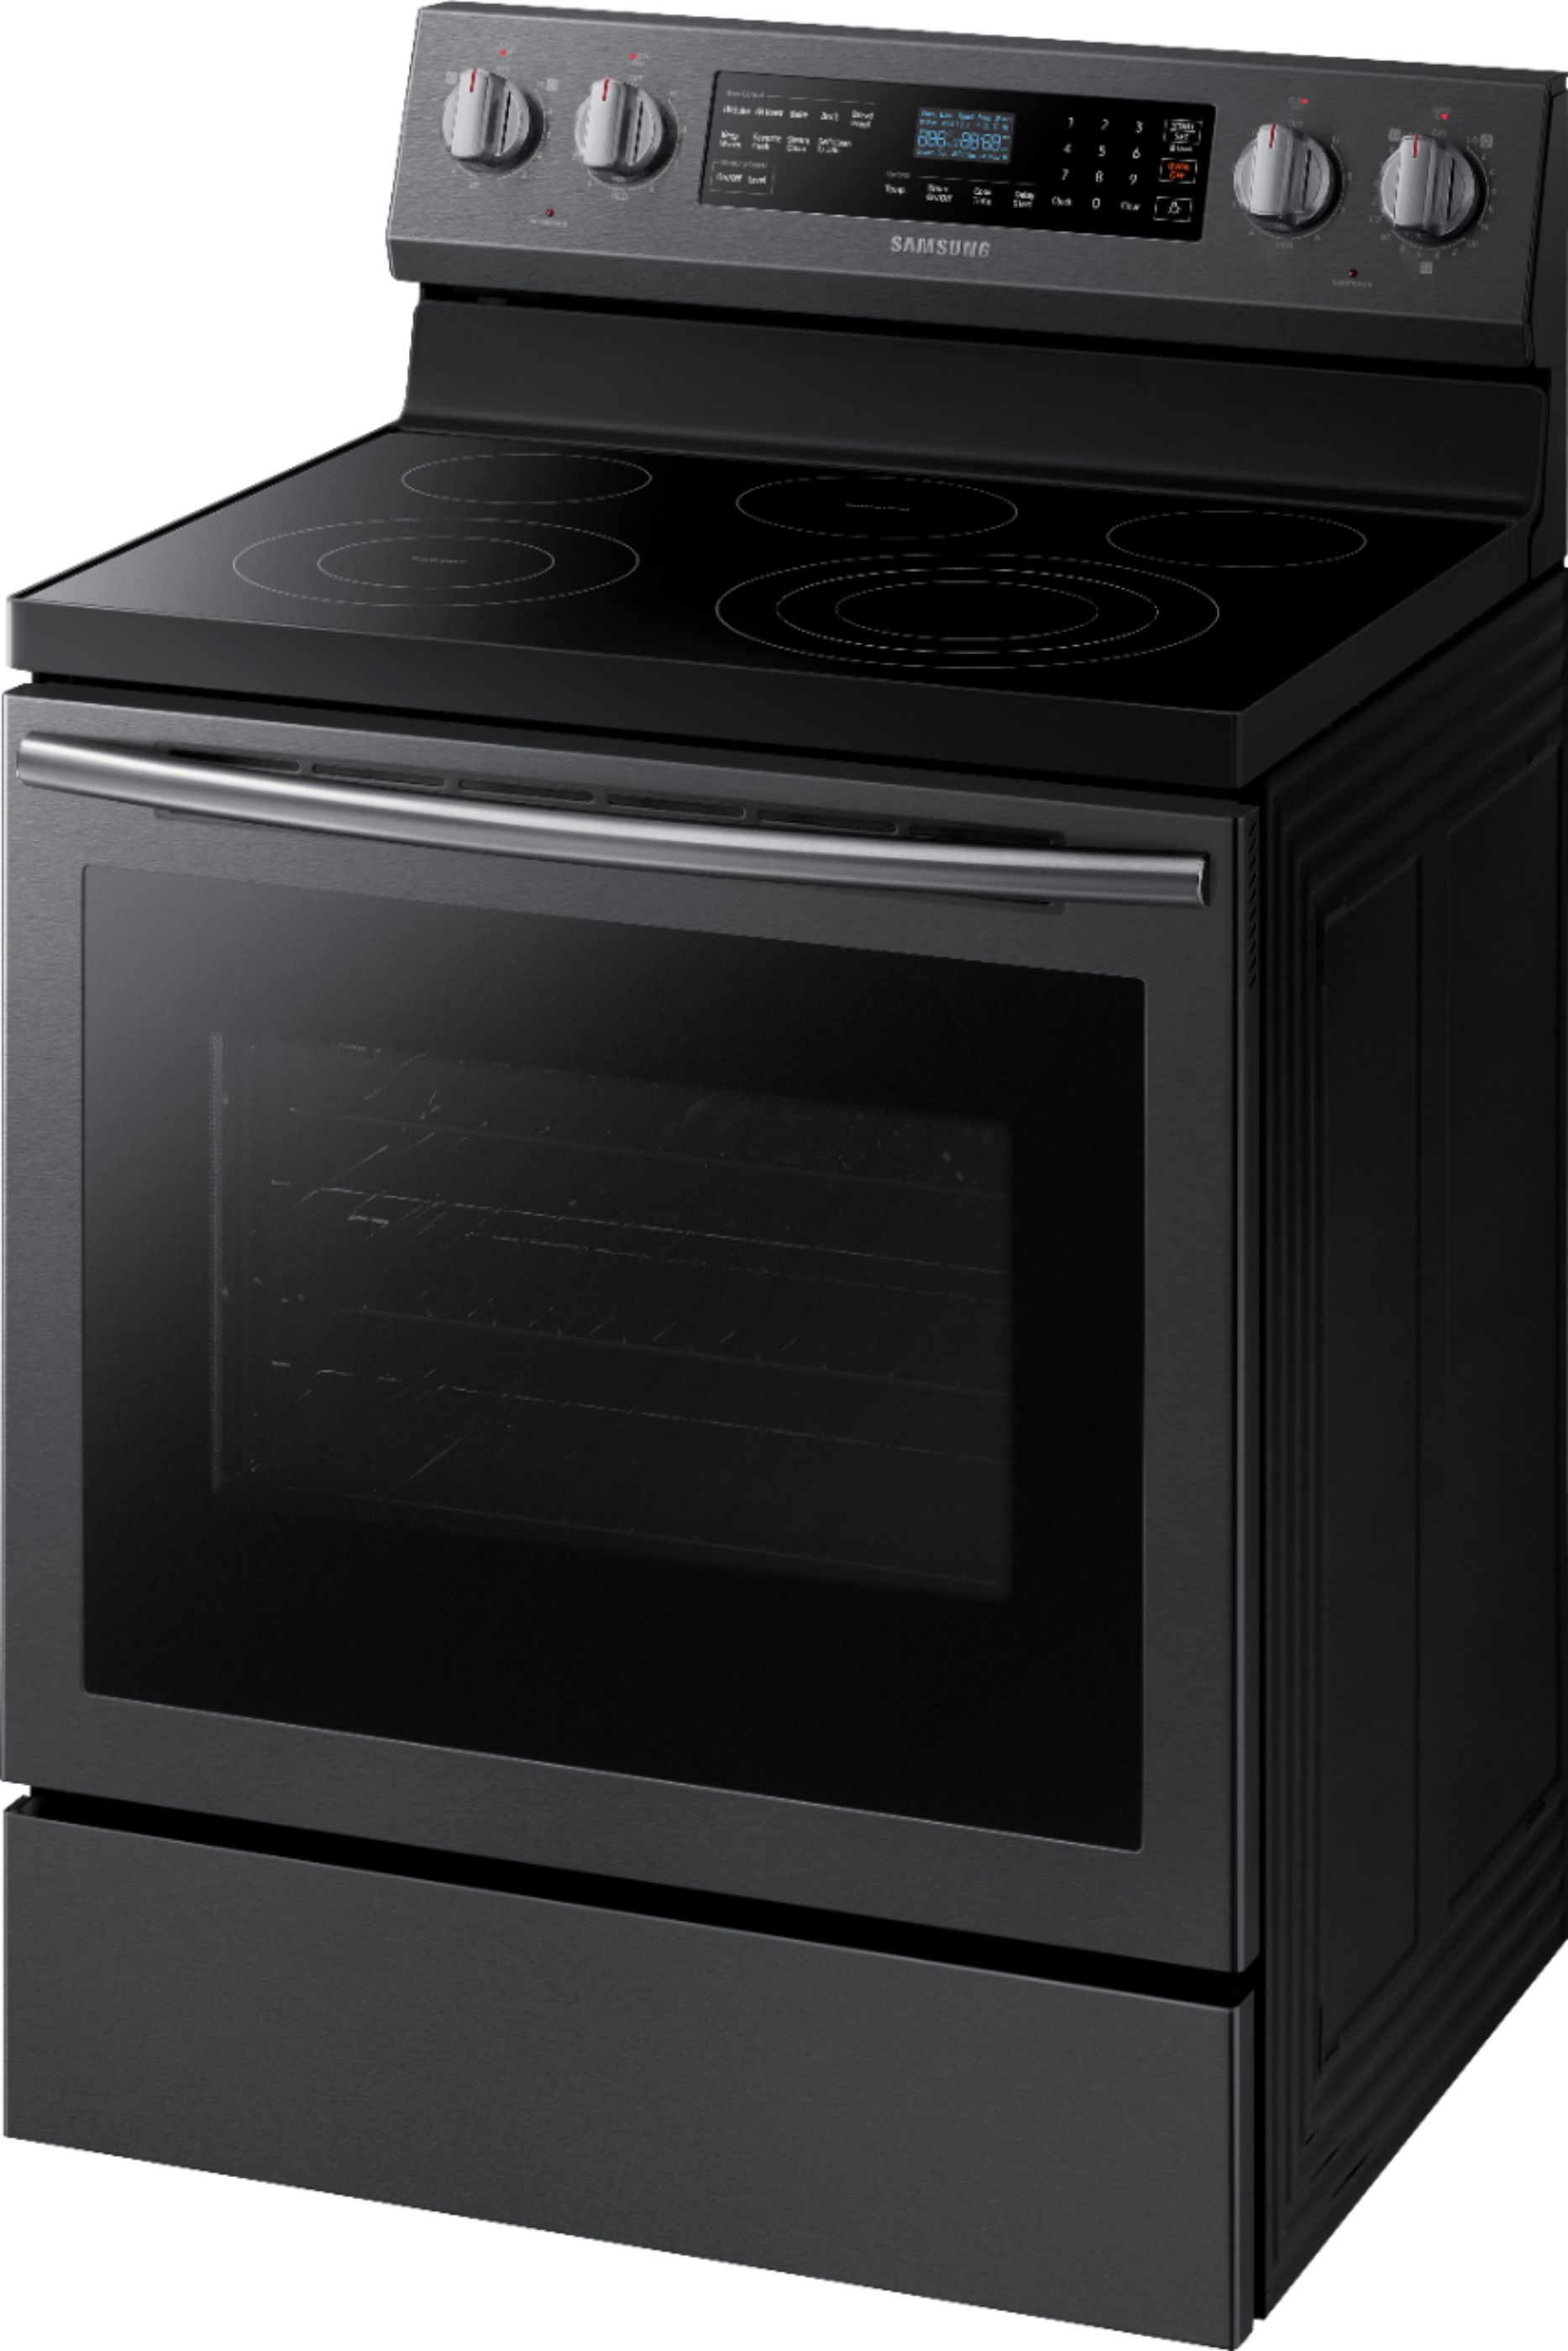 Left View: Samsung - 5.9 Cu. Ft. Self-Cleaning Freestanding Fingerprint Resistant Electric Convection Range - Black Stainless Steel